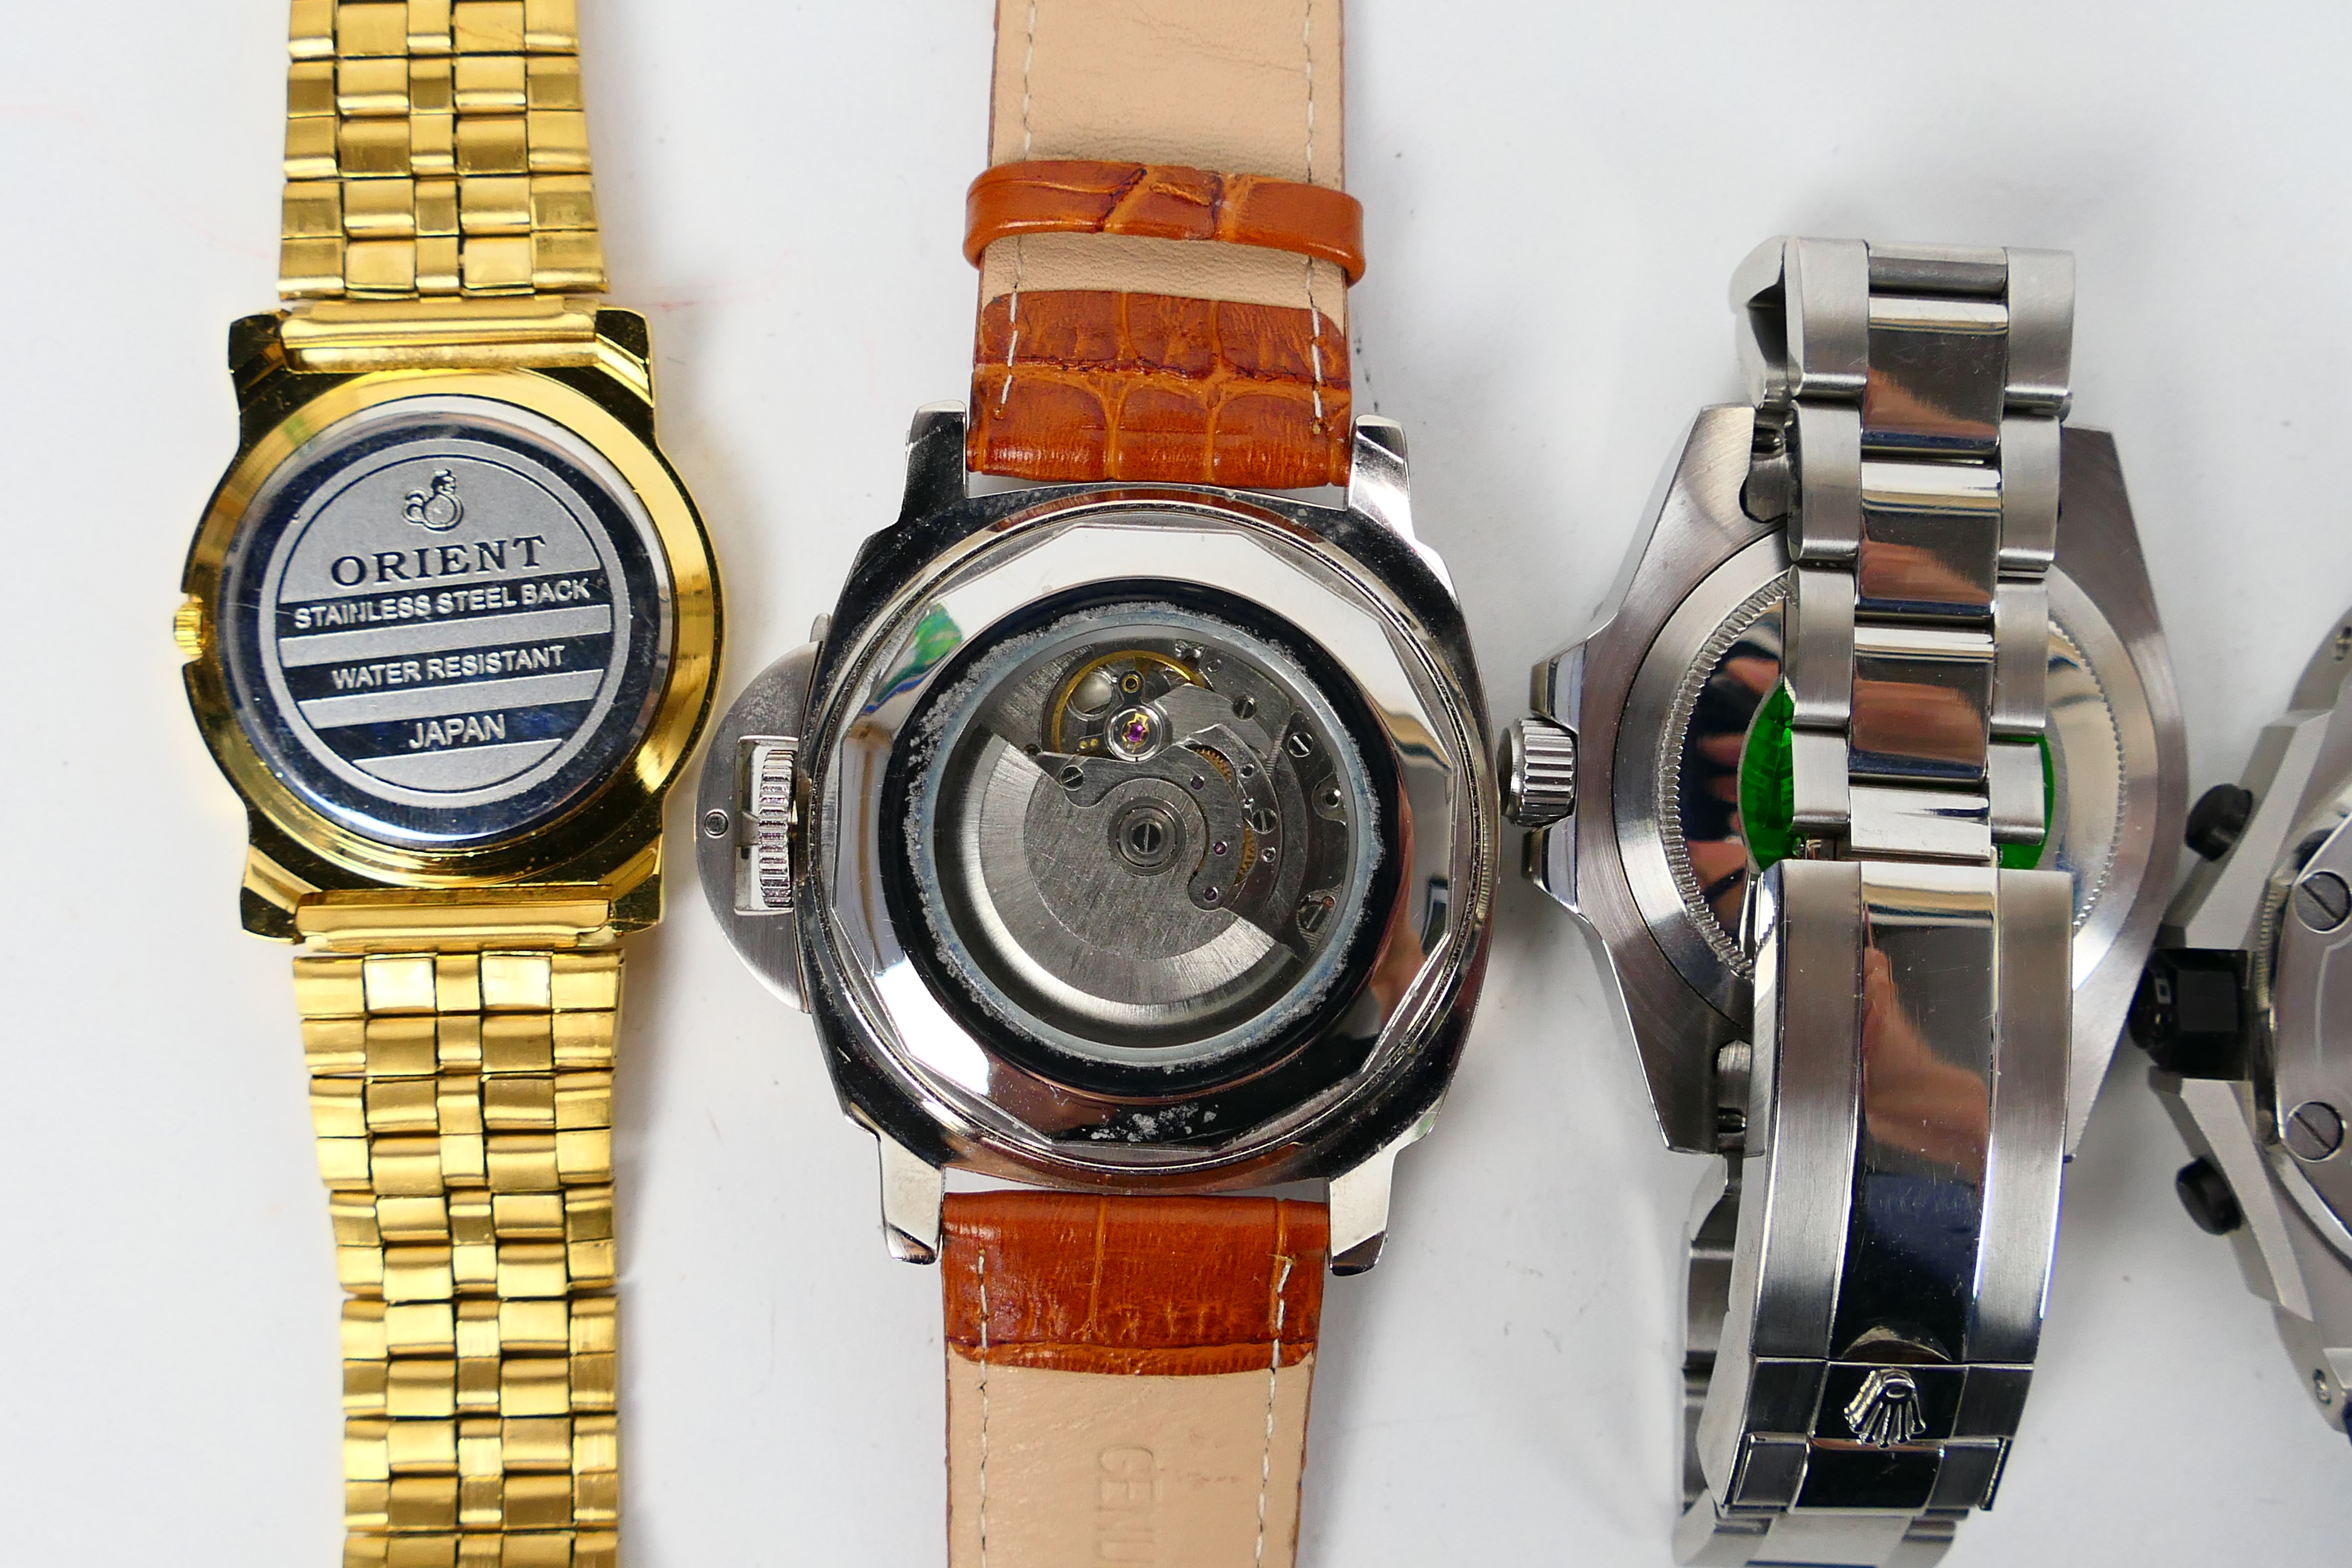 A collection of wrist watches to include Orient, Didun Design, Free Crane and other. - Image 7 of 7